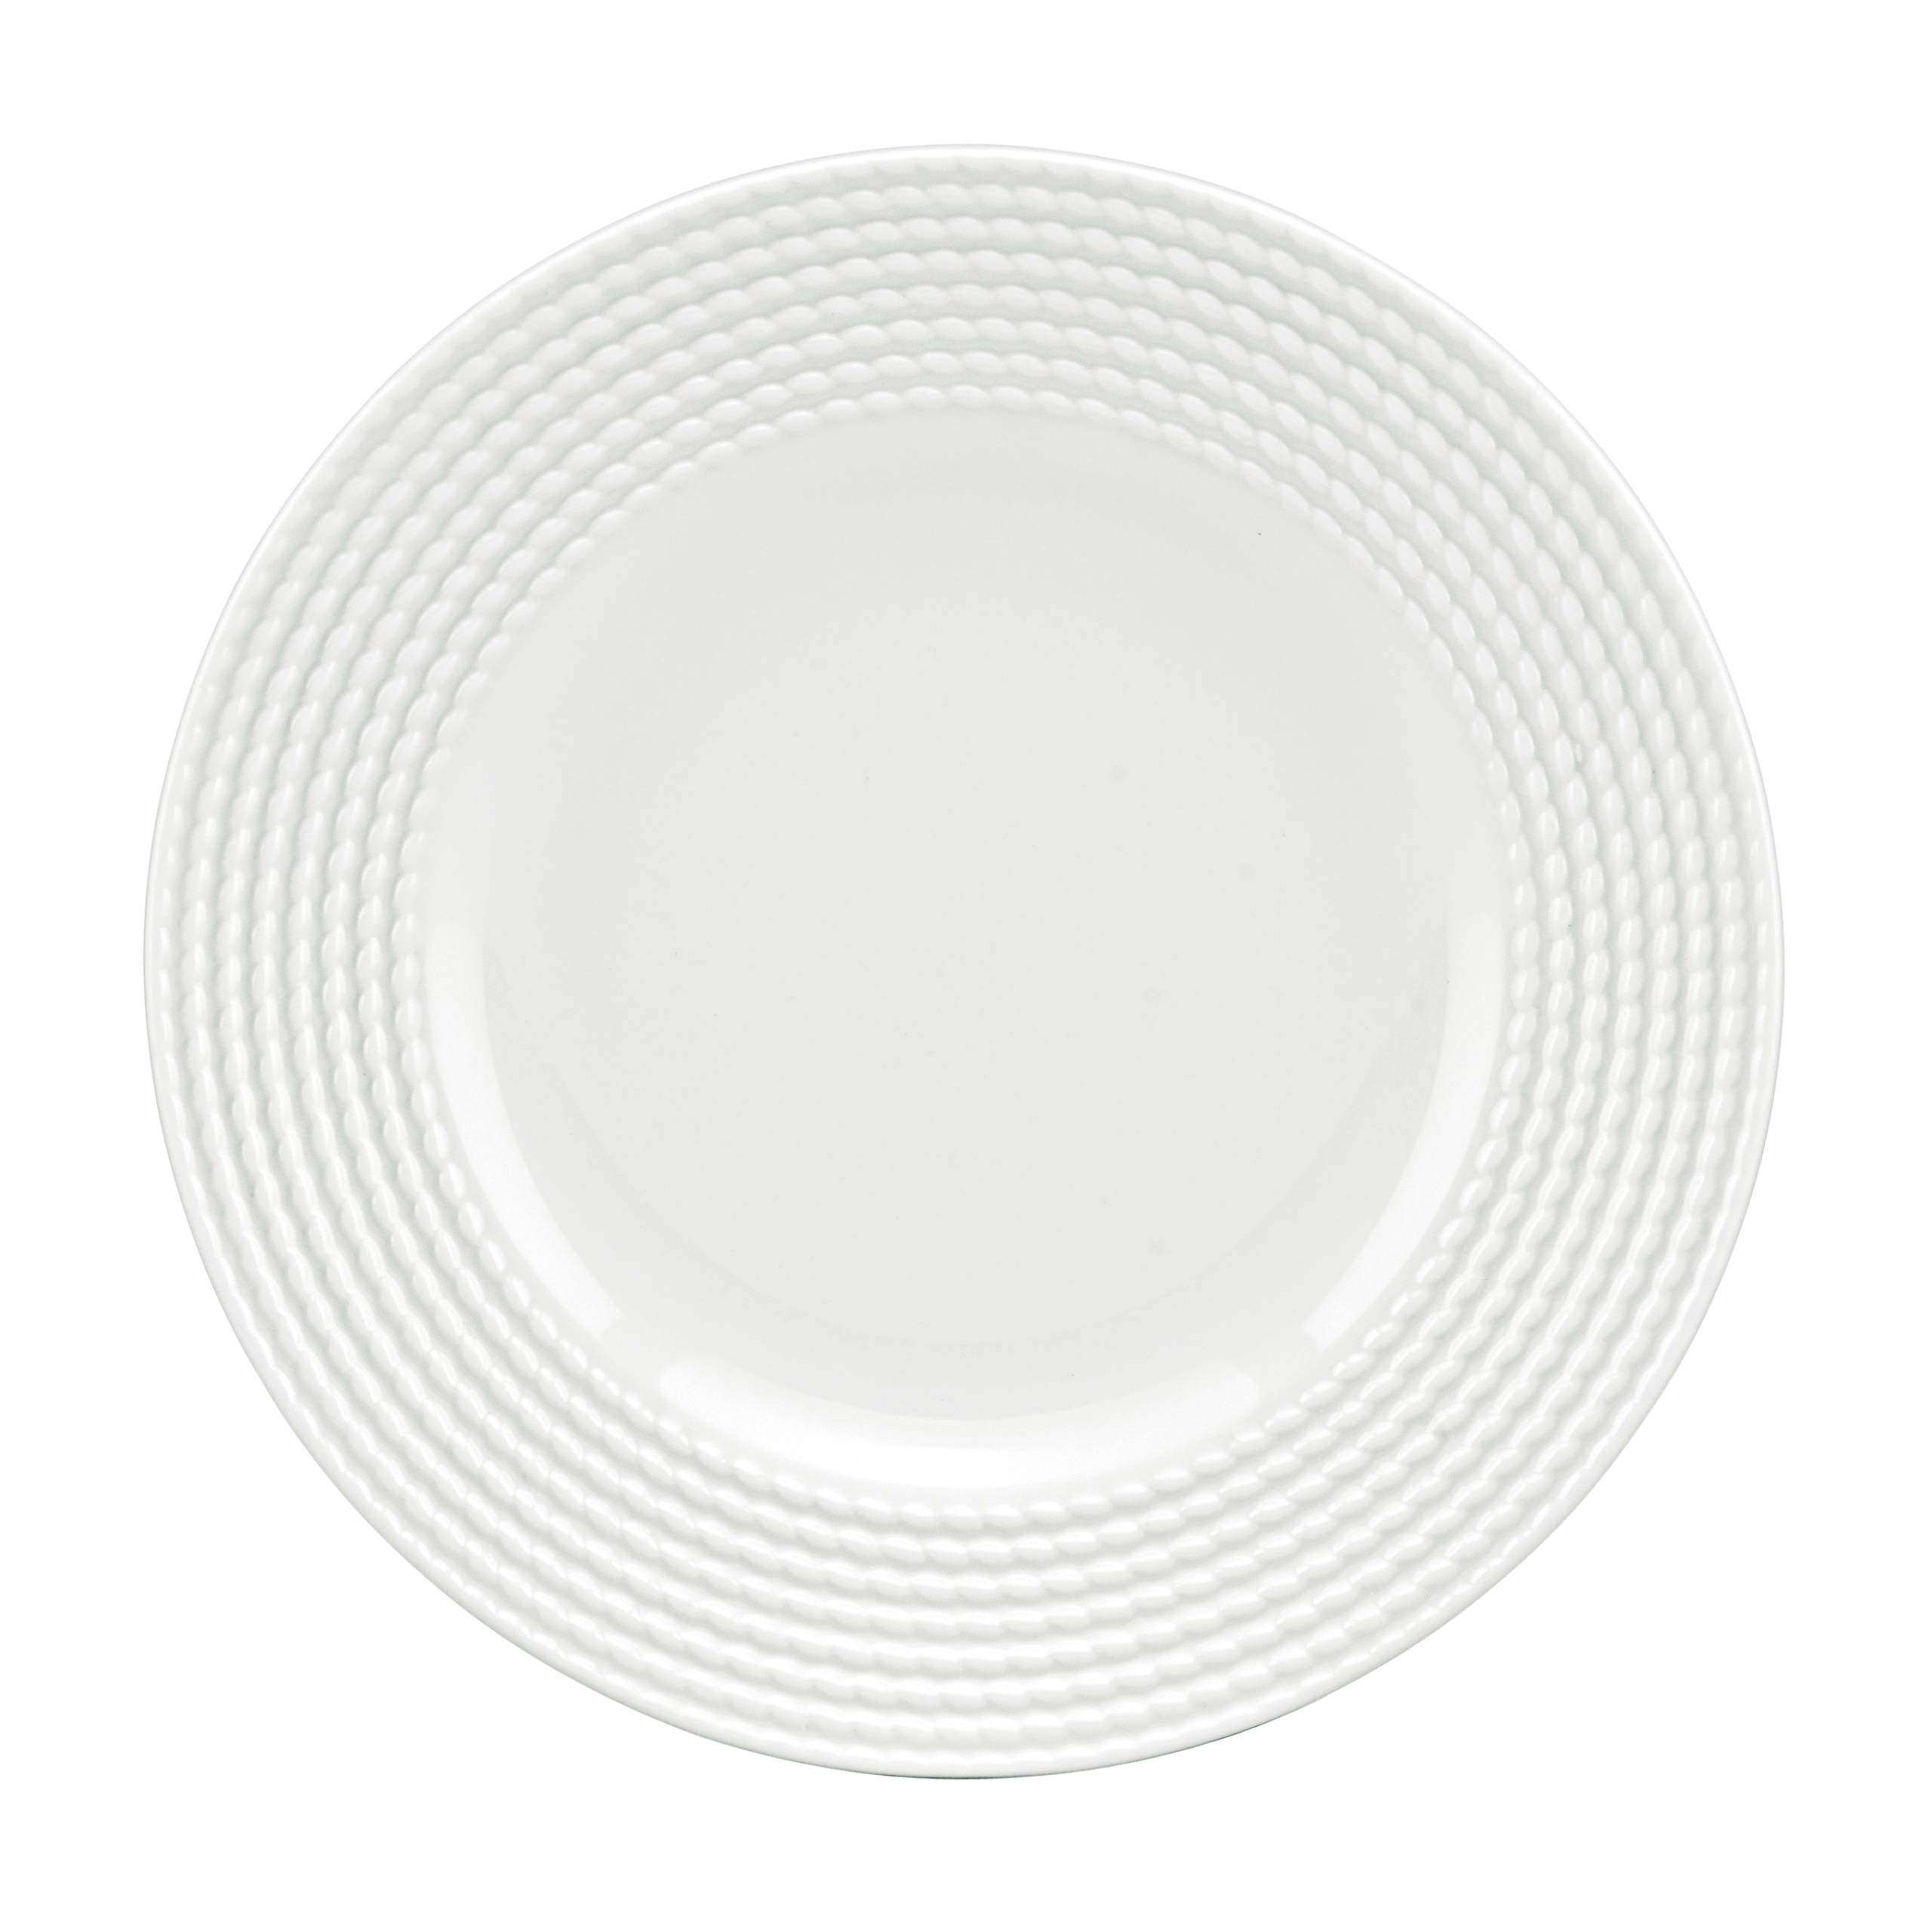 Kate Spade New York Wickford Accent Plate, 1.15 LB, White